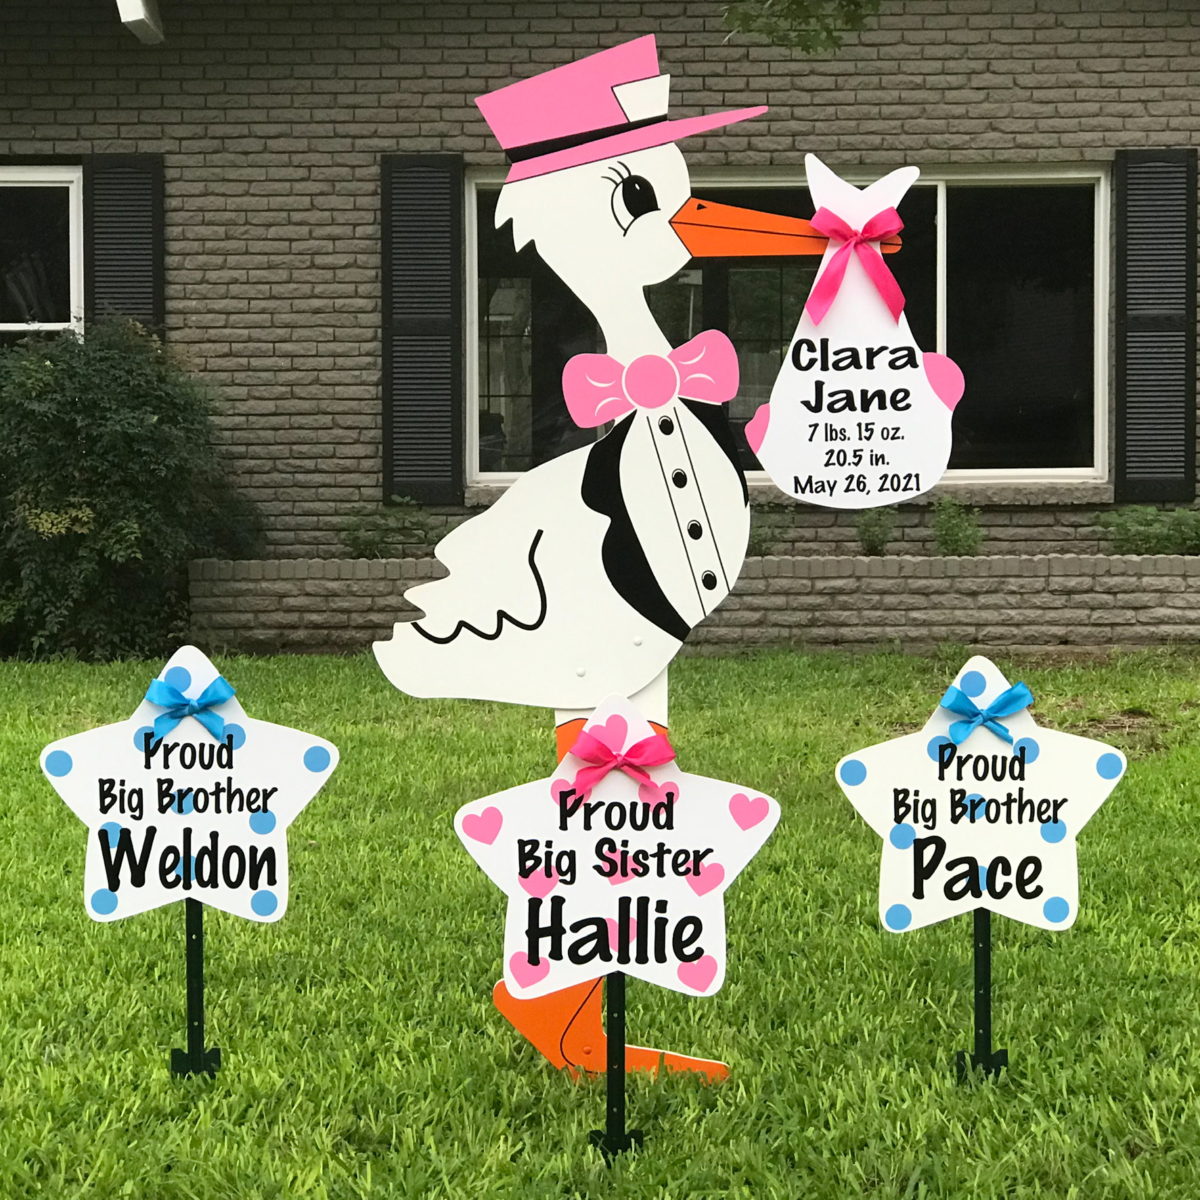 Pink Stork Sign with SIbling Stars: South Bay Storks - Stork Sign Rentals in Los Angeles County, CA